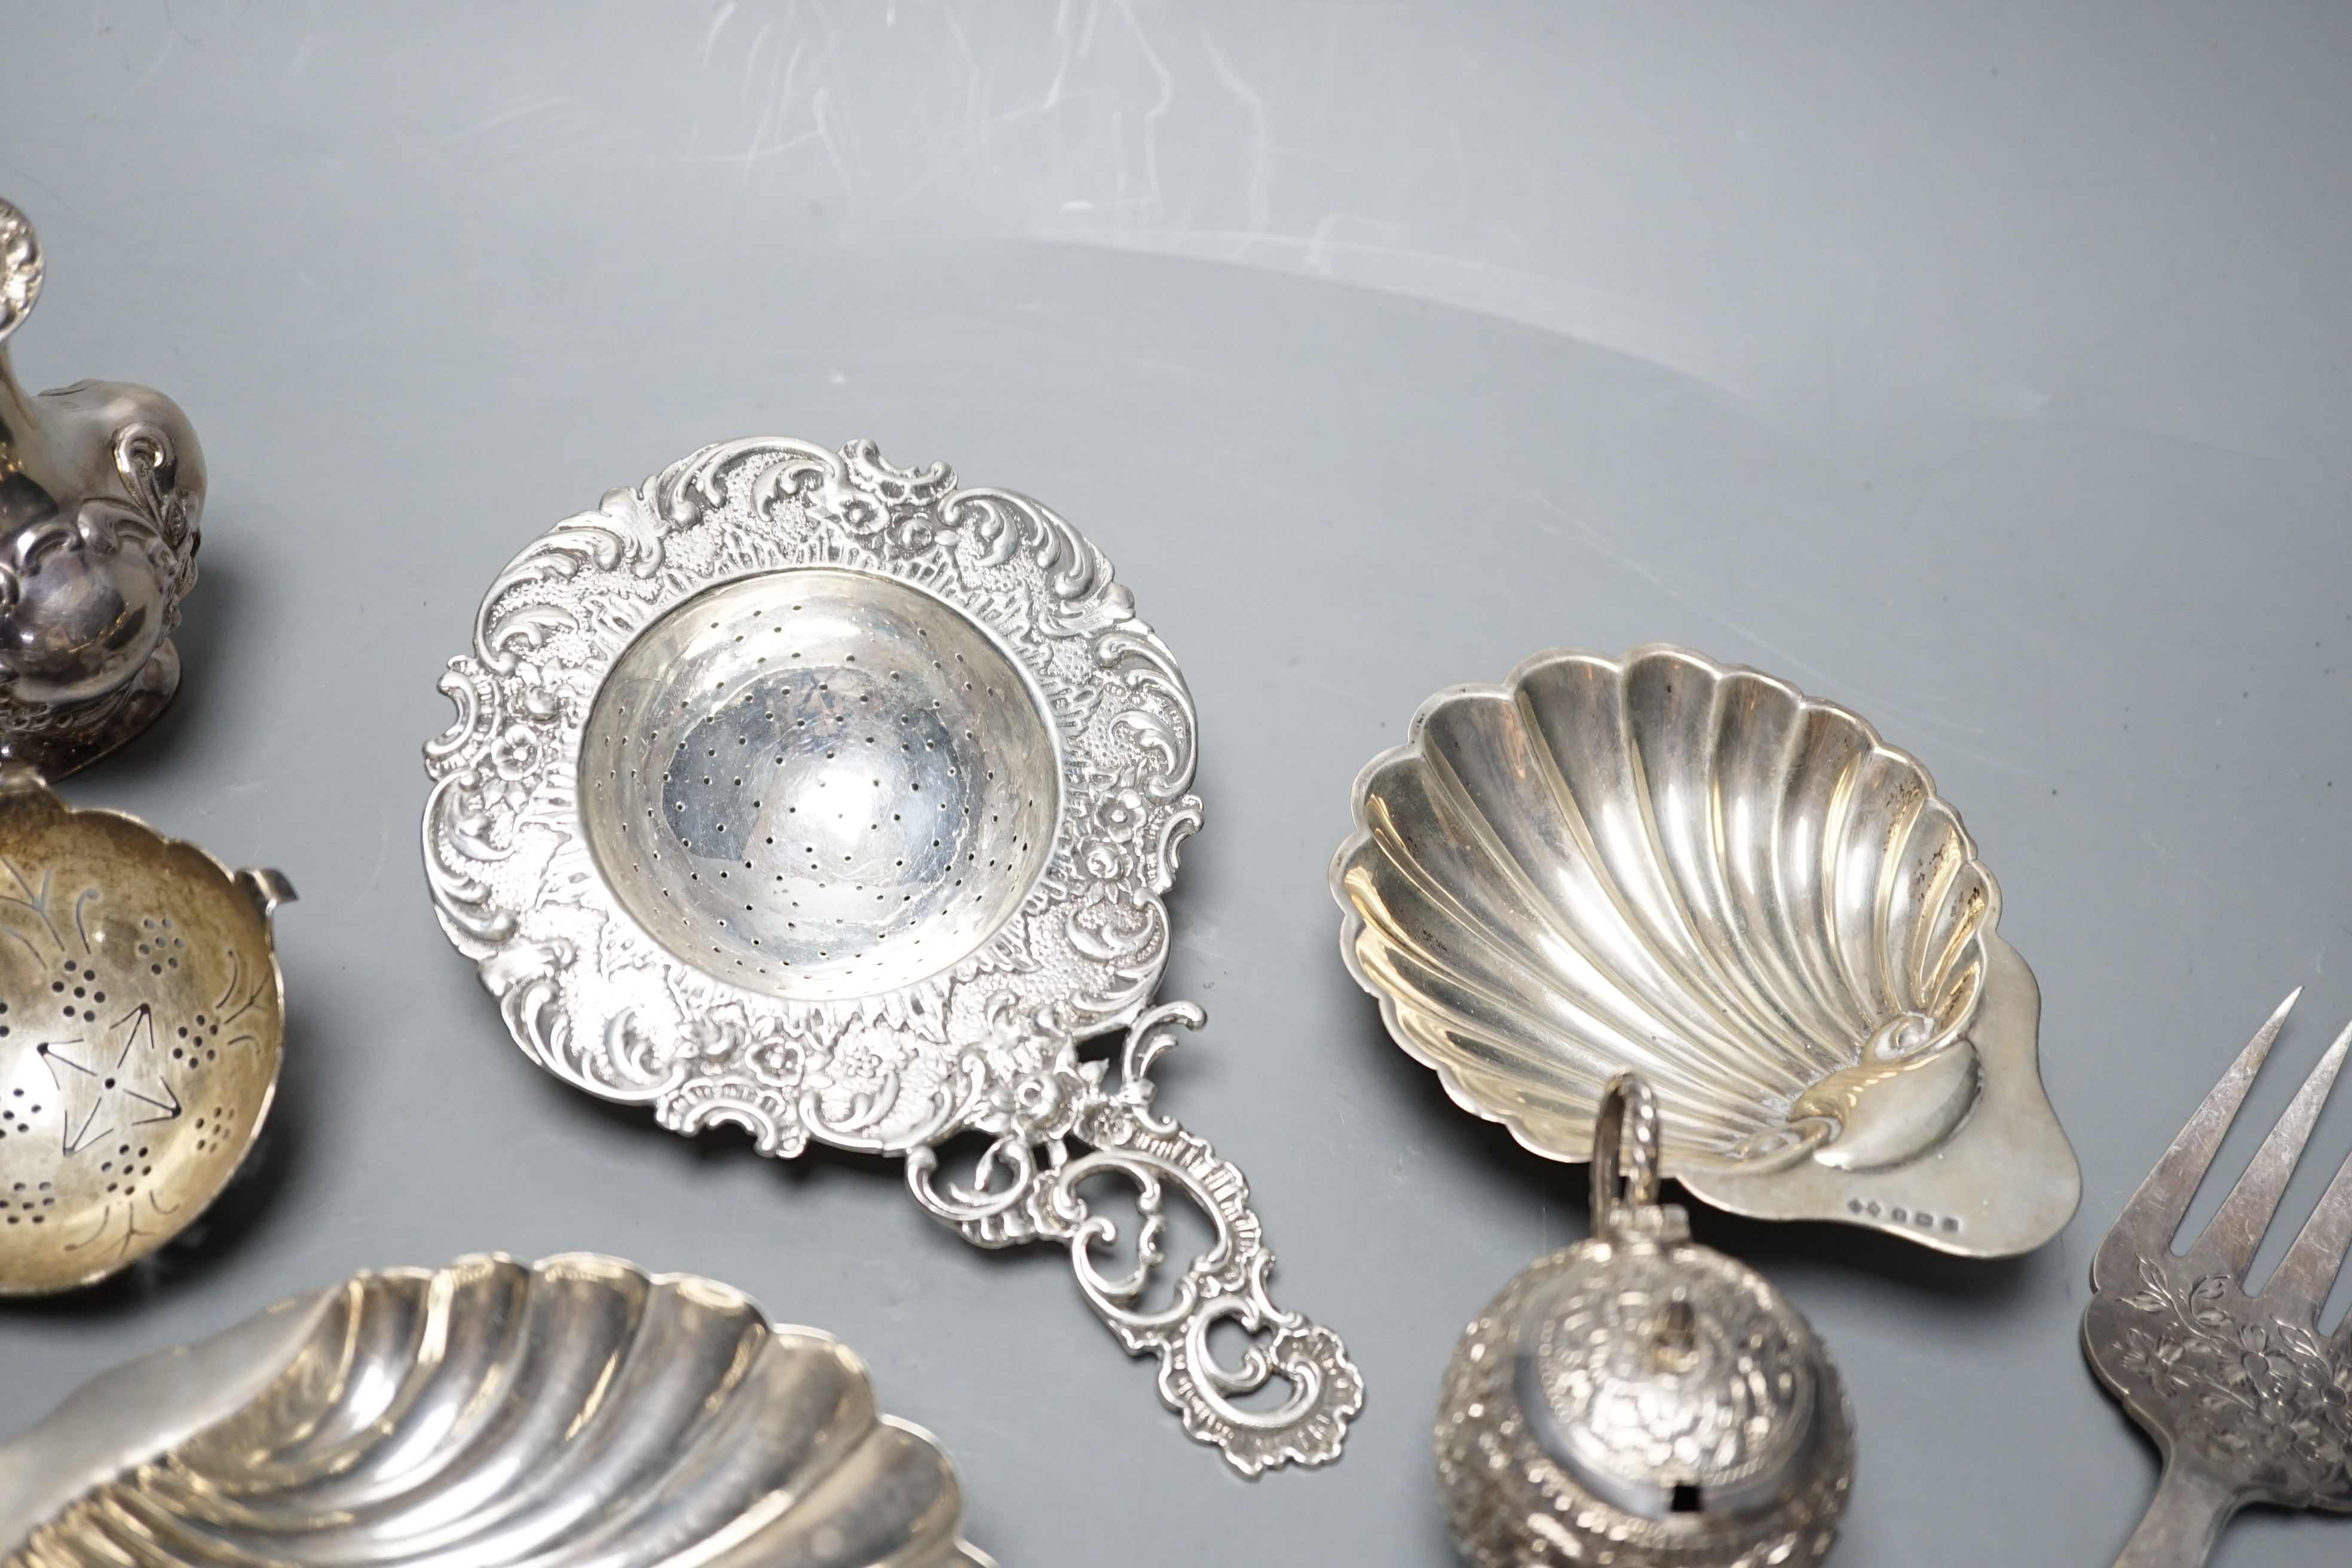 Small silver including two butter shells, a continental silver tea strainer, English tea strainer, pair of salts, swizzle stick, serving fork, two pepperettes and an Indian white metal three piece condiment set.